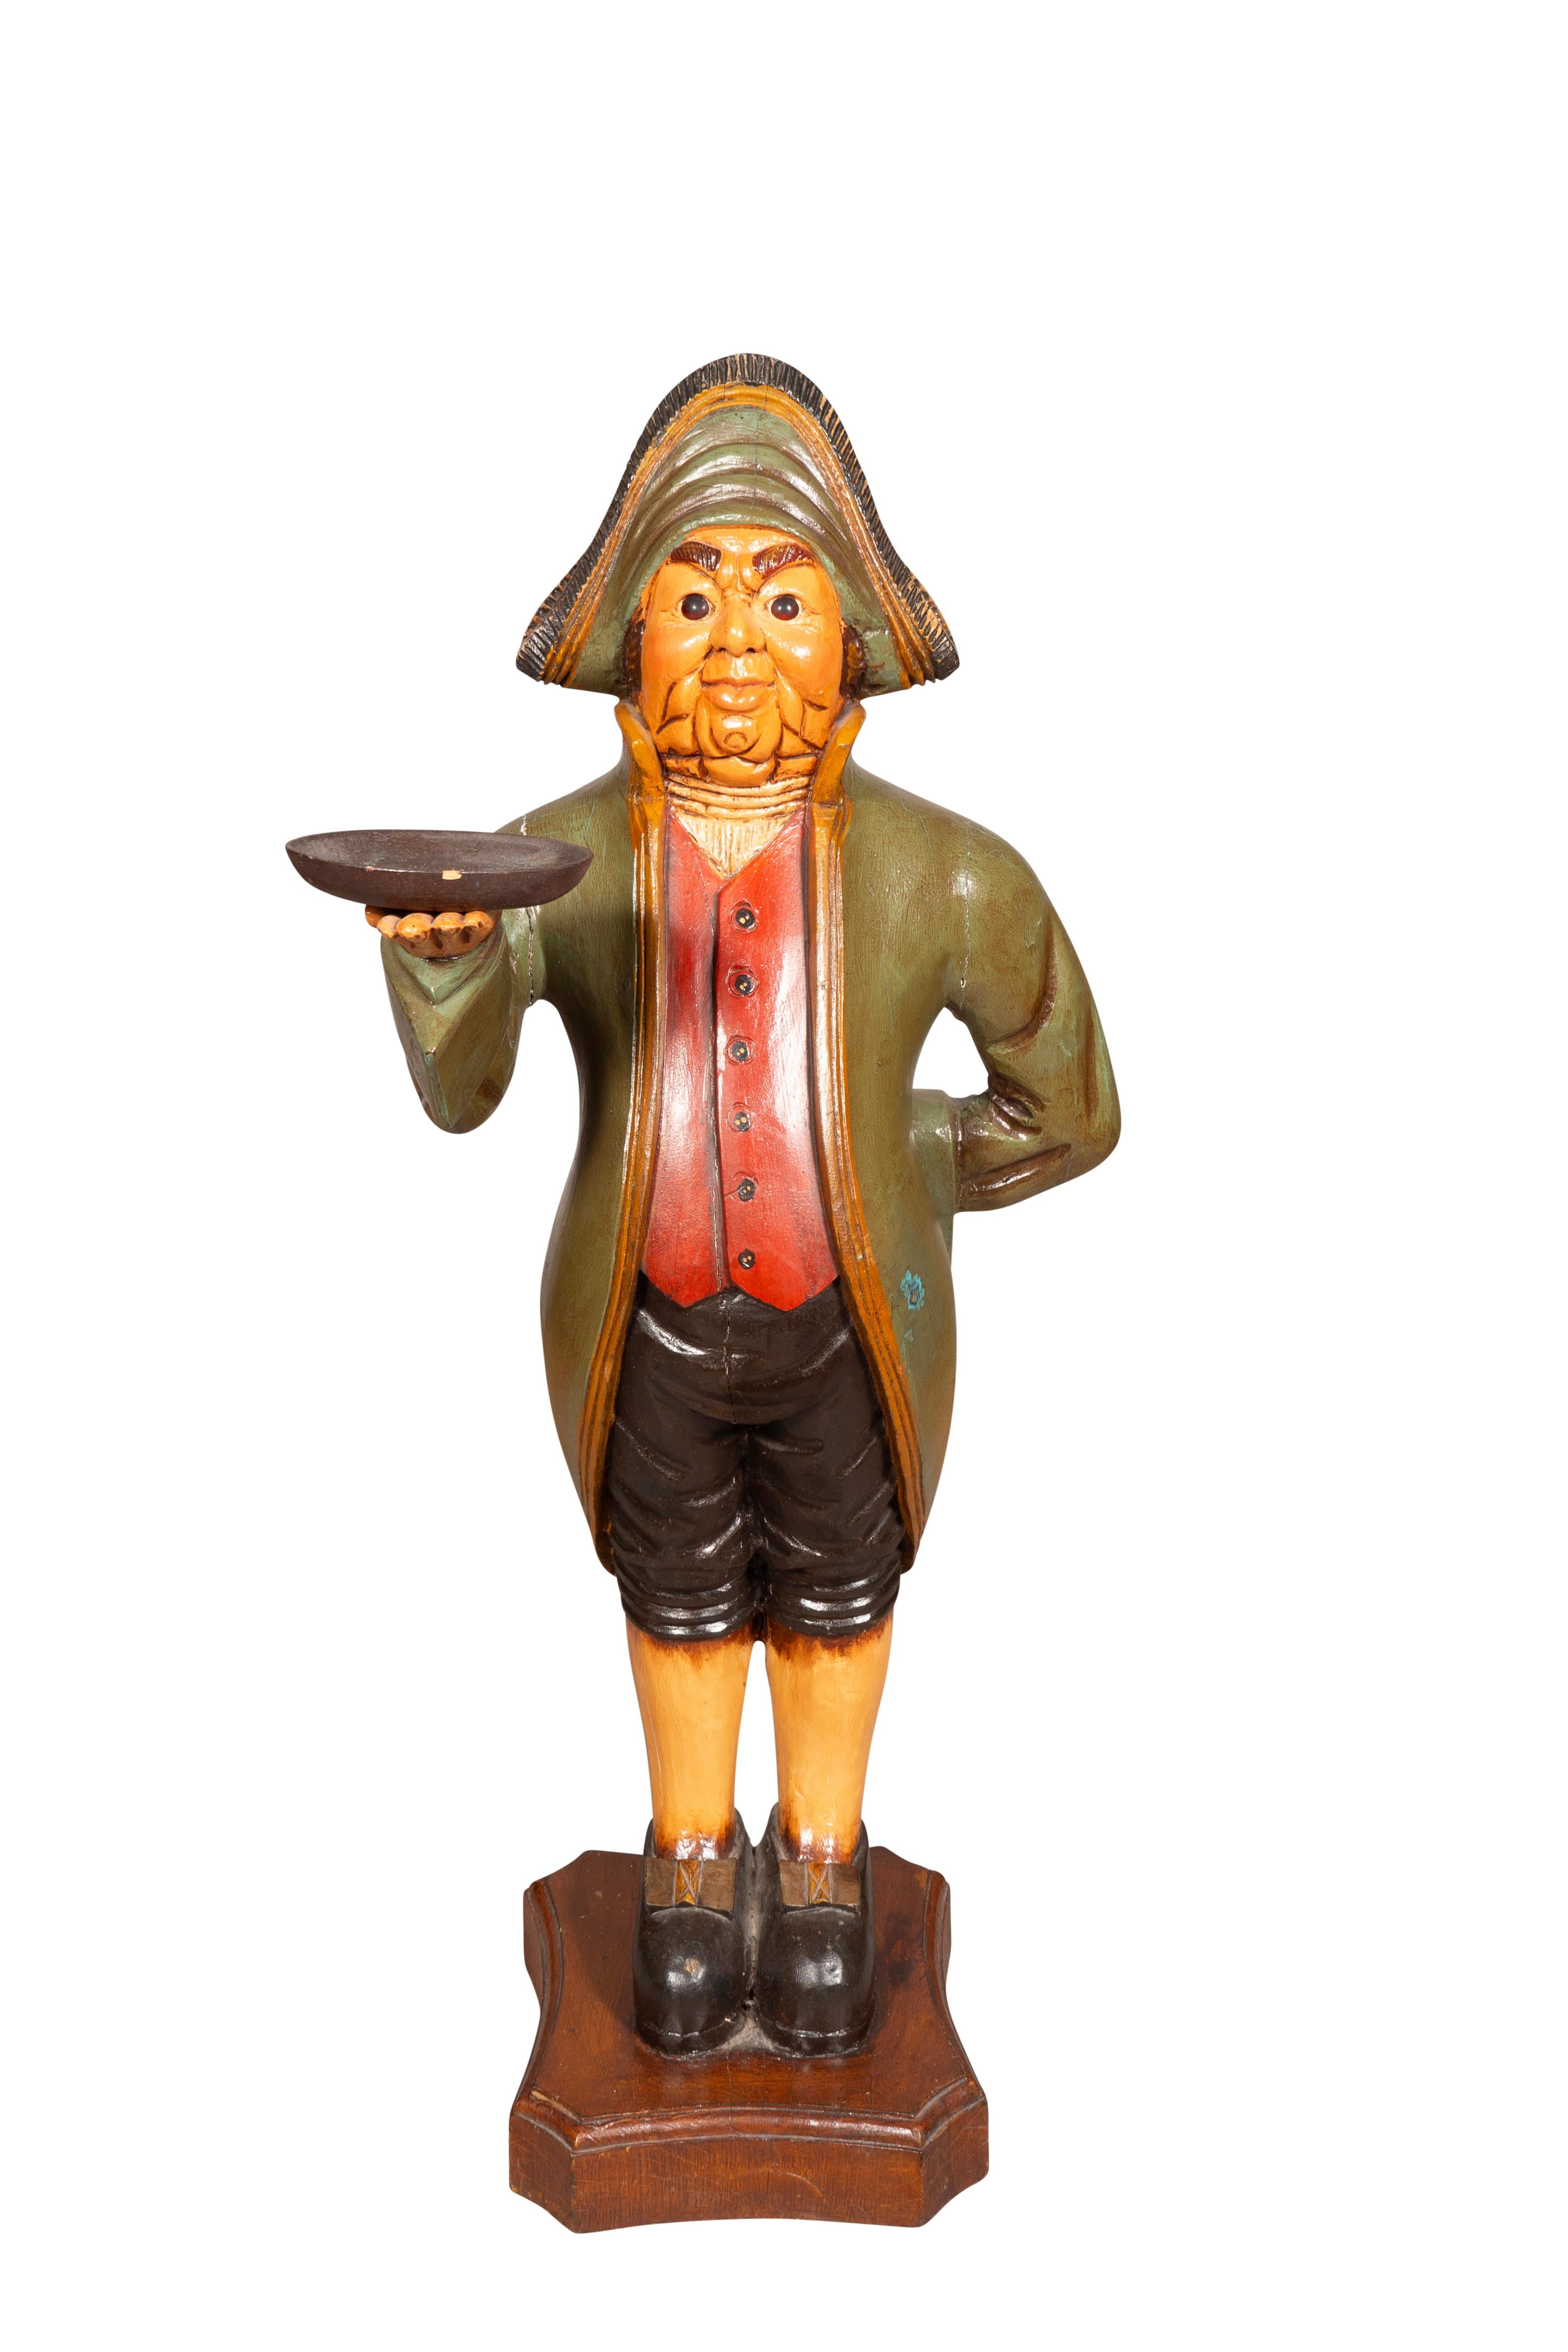 Humorous well carved fellow standing holding a shallow bowl possibly for calling cards. Estate of the founder of Yankee Candle Company.